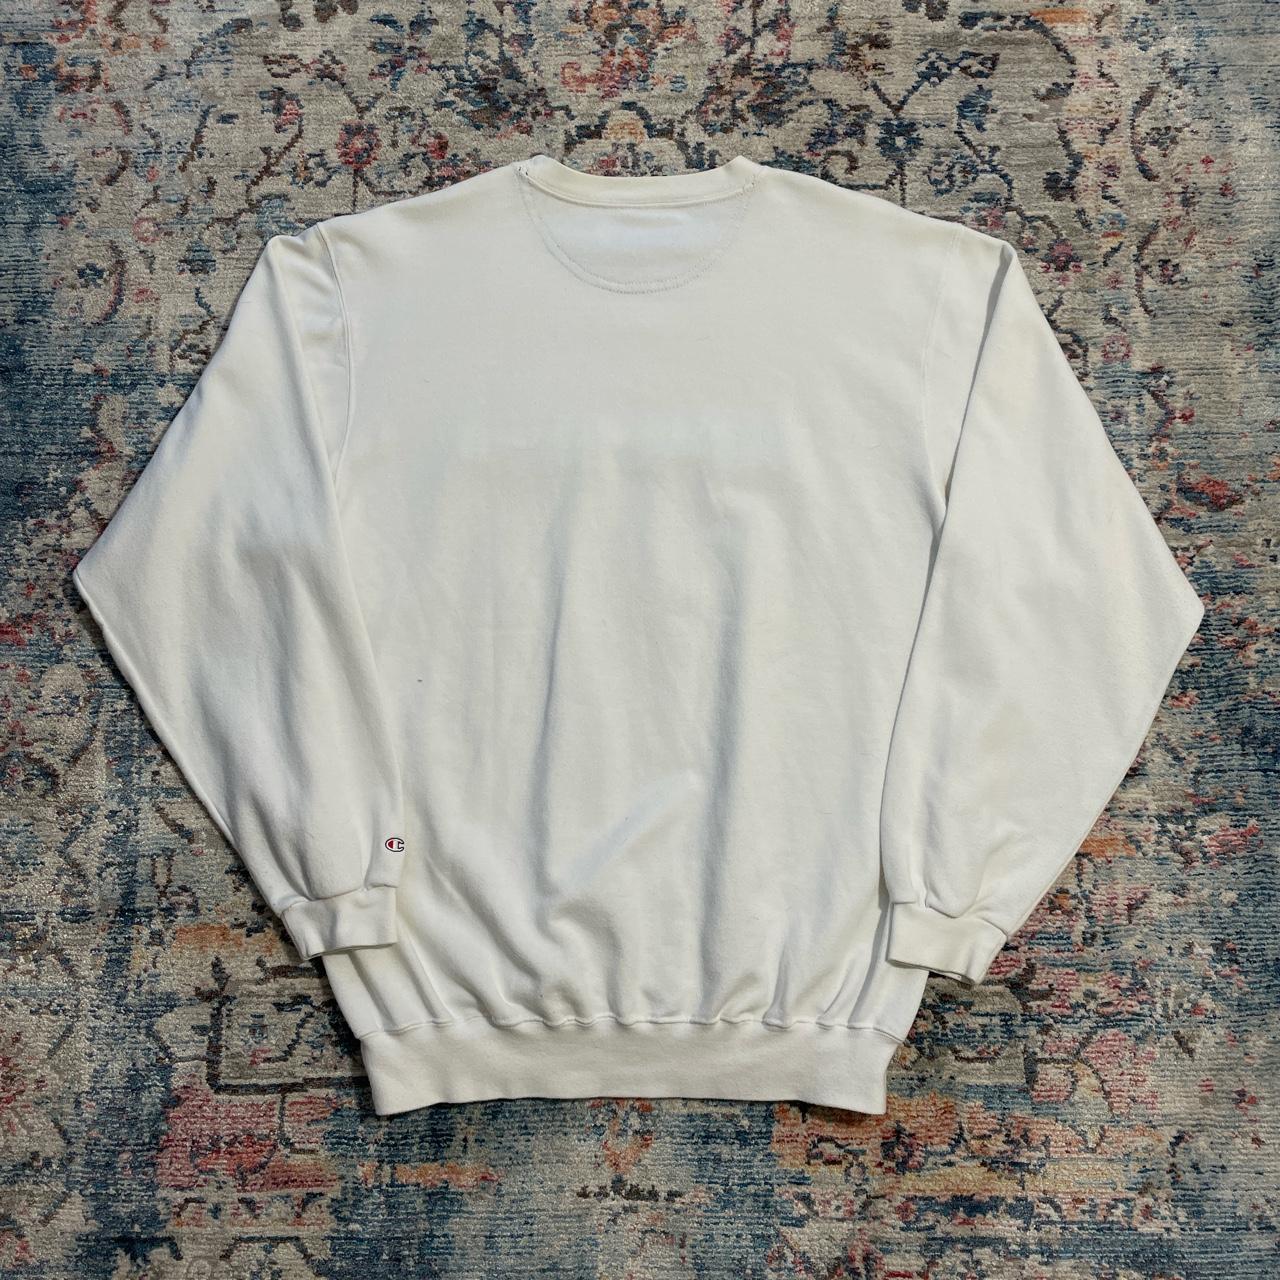 Vintage Champion White Spell Out Sweatshirt